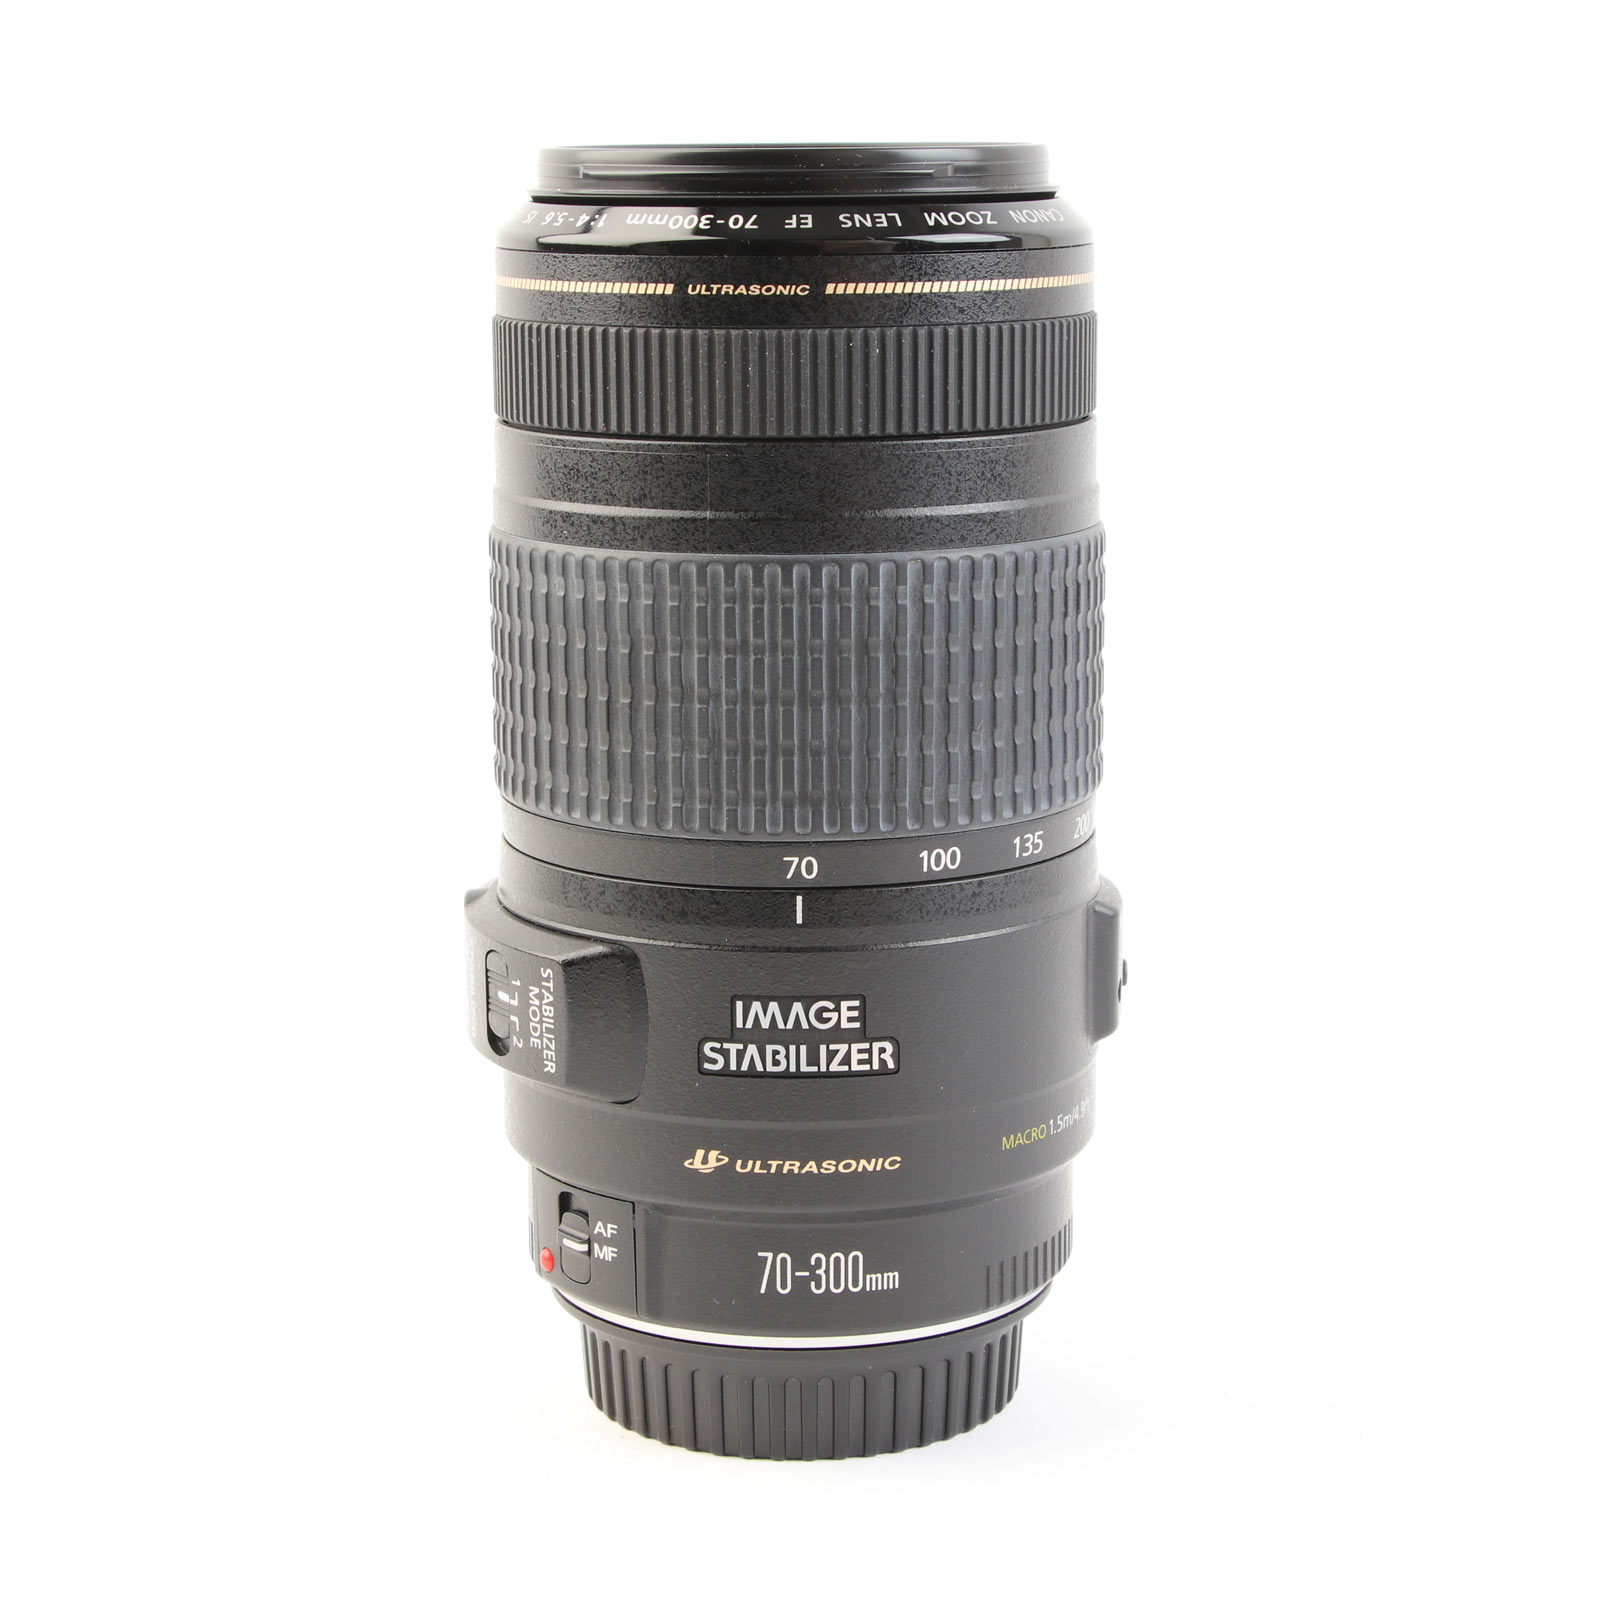 USED Canon EF 70-300mm f4-5.6 IS USM Lens | Wex Photo Video